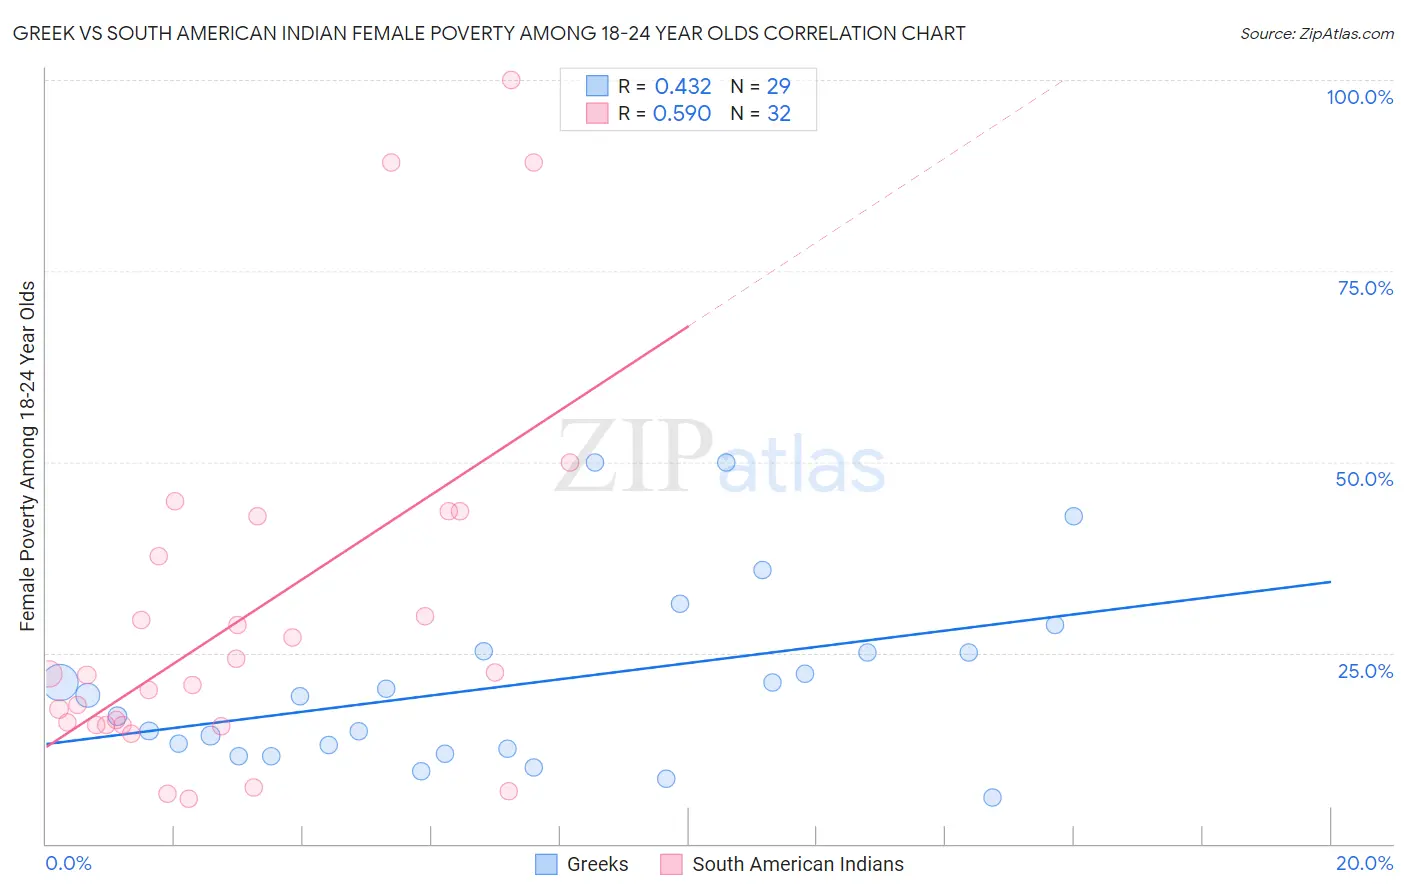 Greek vs South American Indian Female Poverty Among 18-24 Year Olds